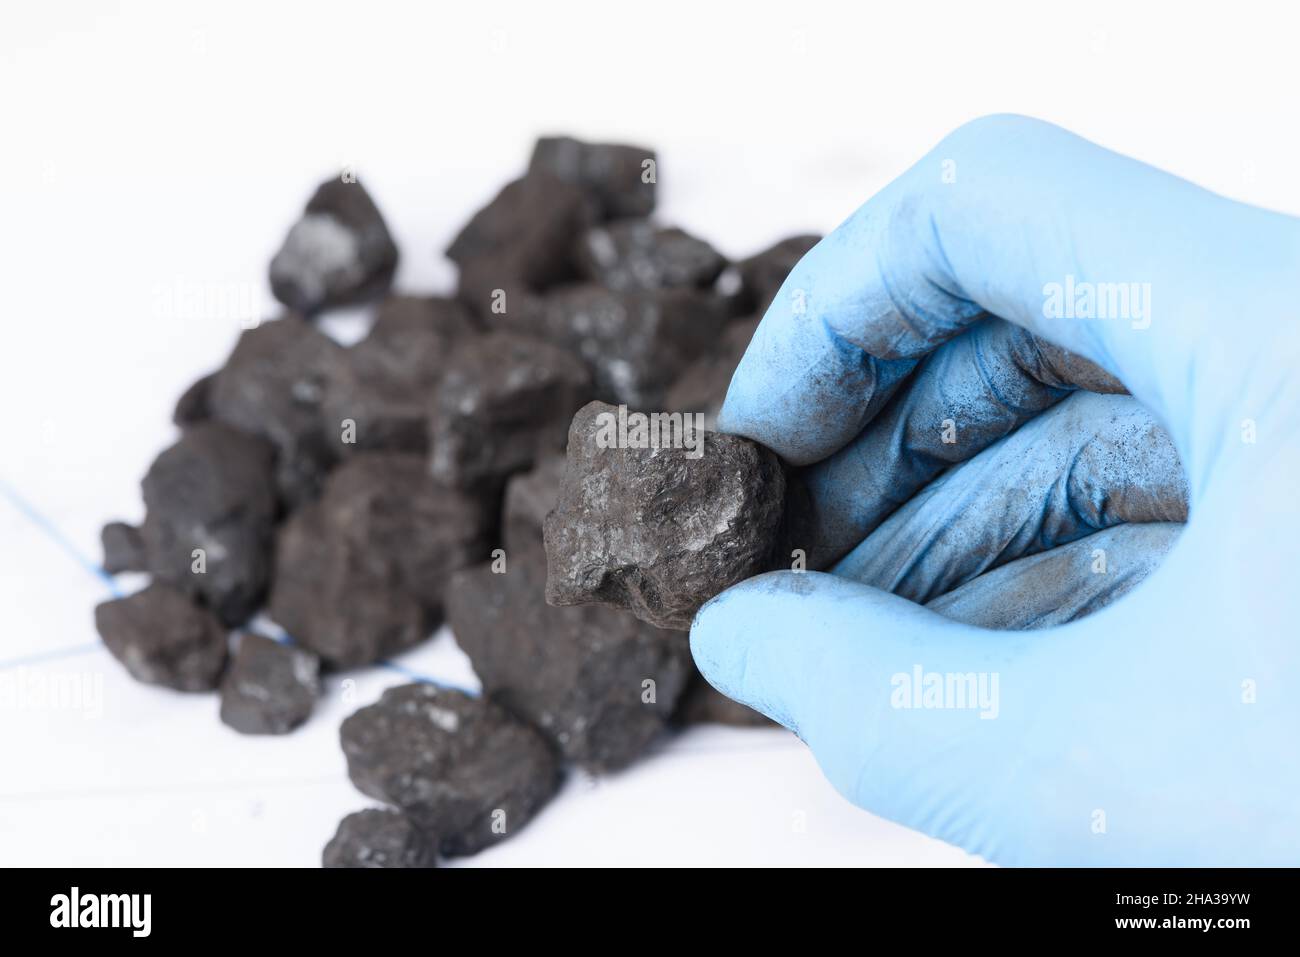 Coal lump in scientist hand. Laboratory coal analysis, fossil fuel research. Stock Photo